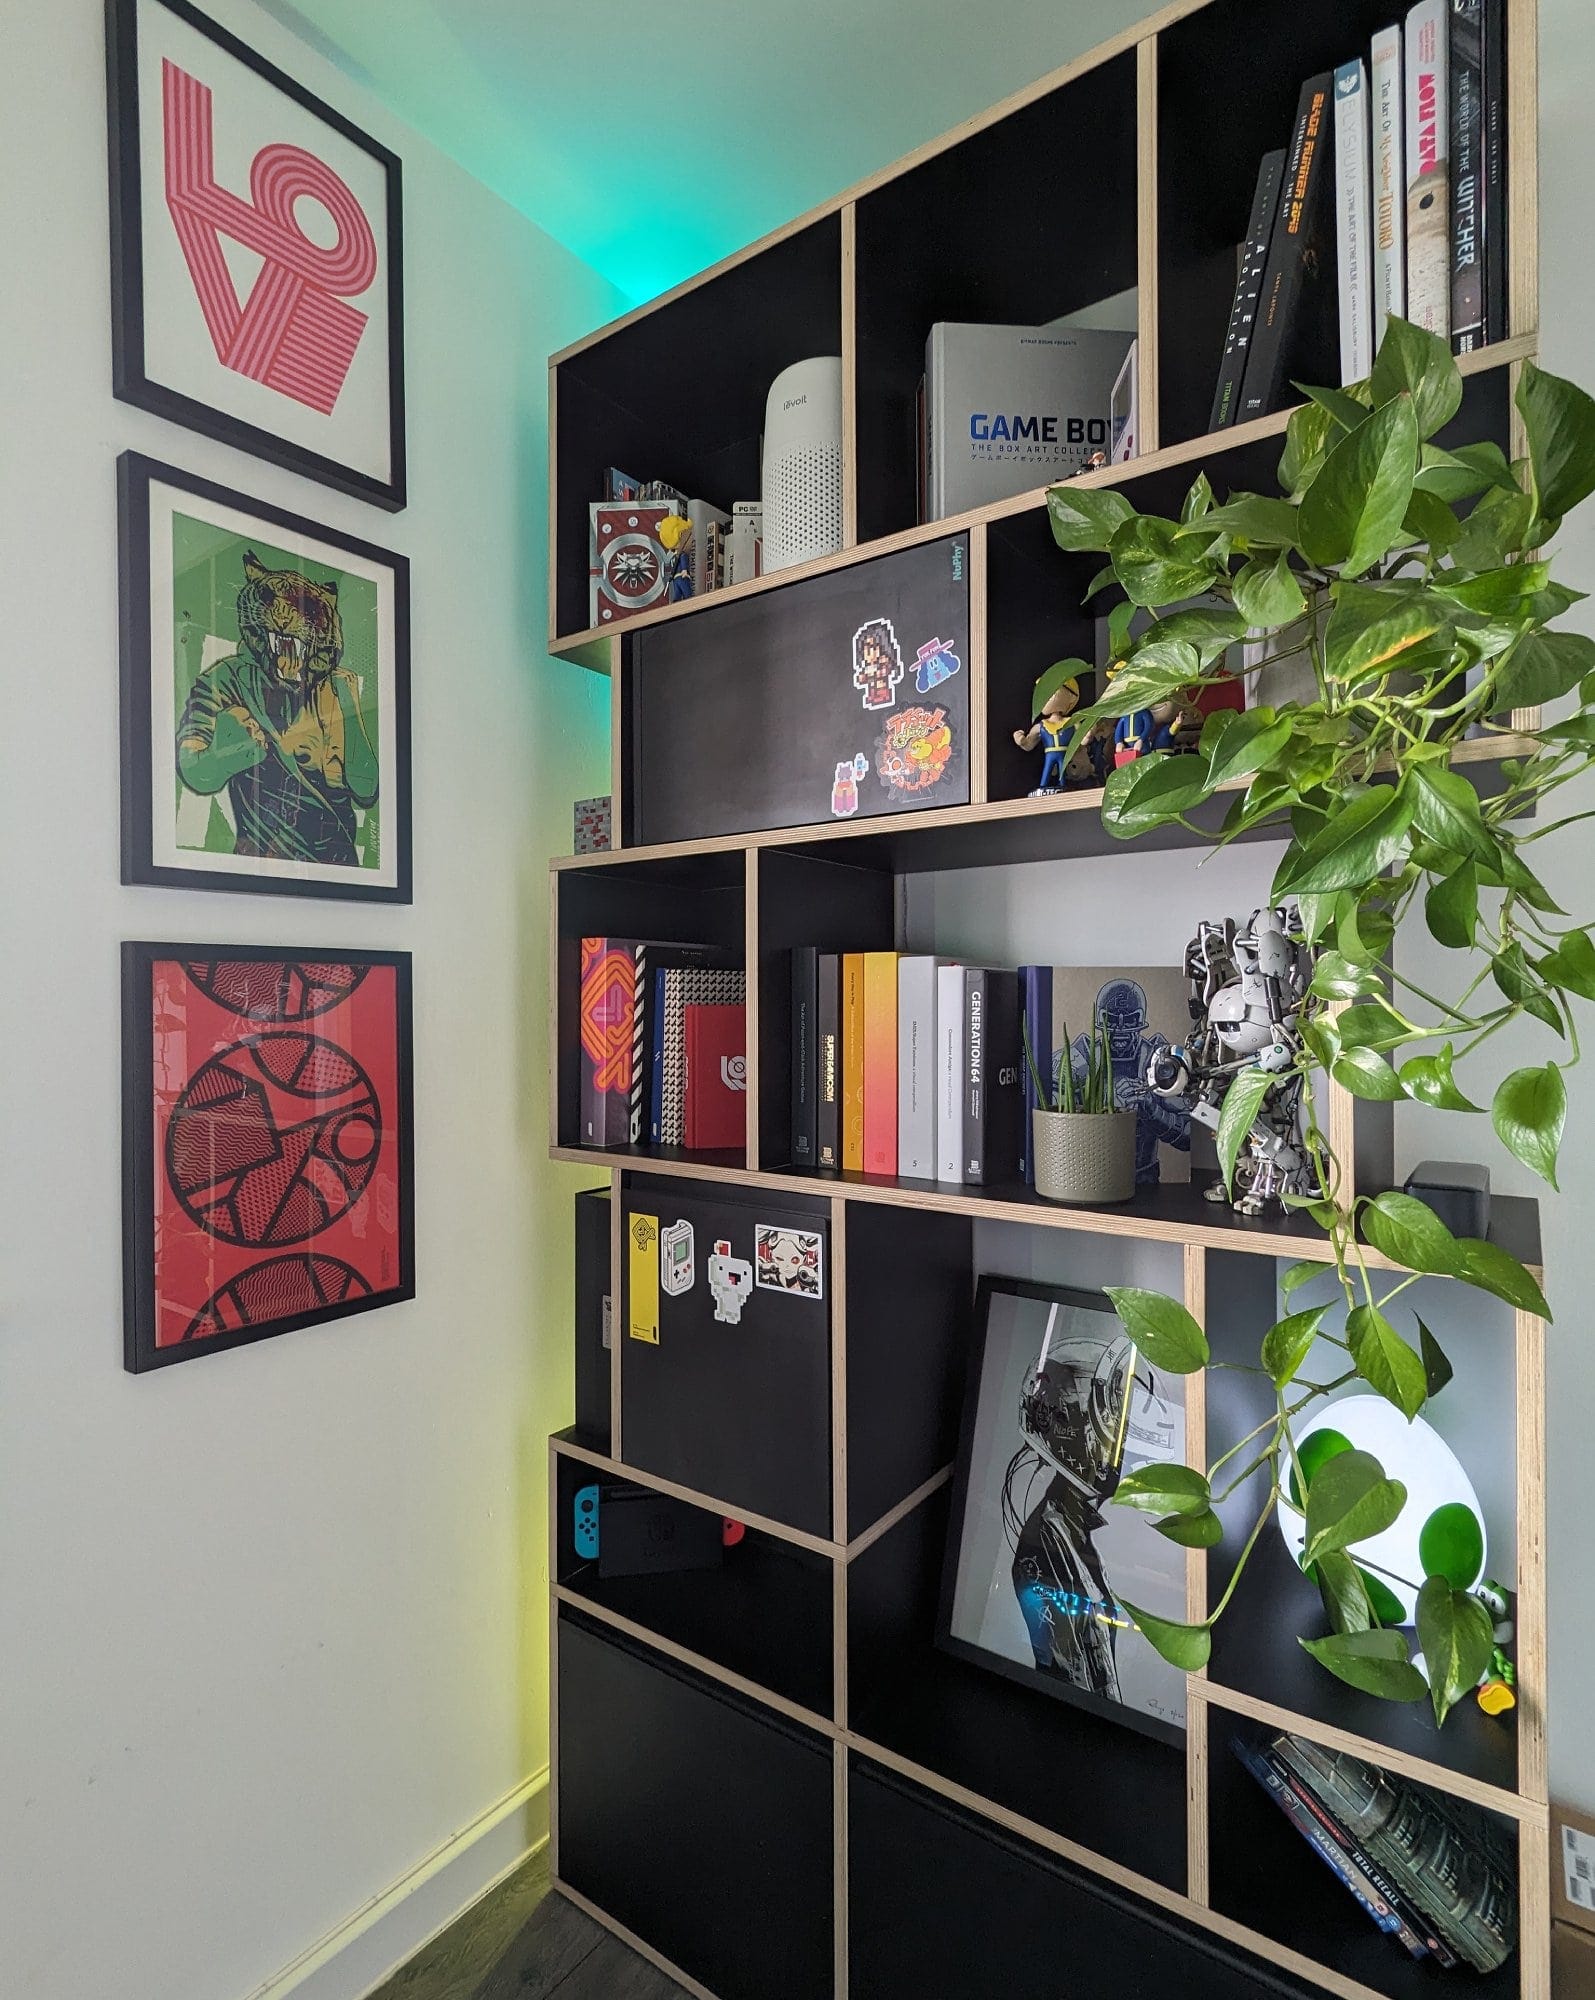 A Tylko shelving unit in a home office displaying books, collectibles, and decor items, adorned with vibrant green plants and accompanied by framed art on the adjacent wall